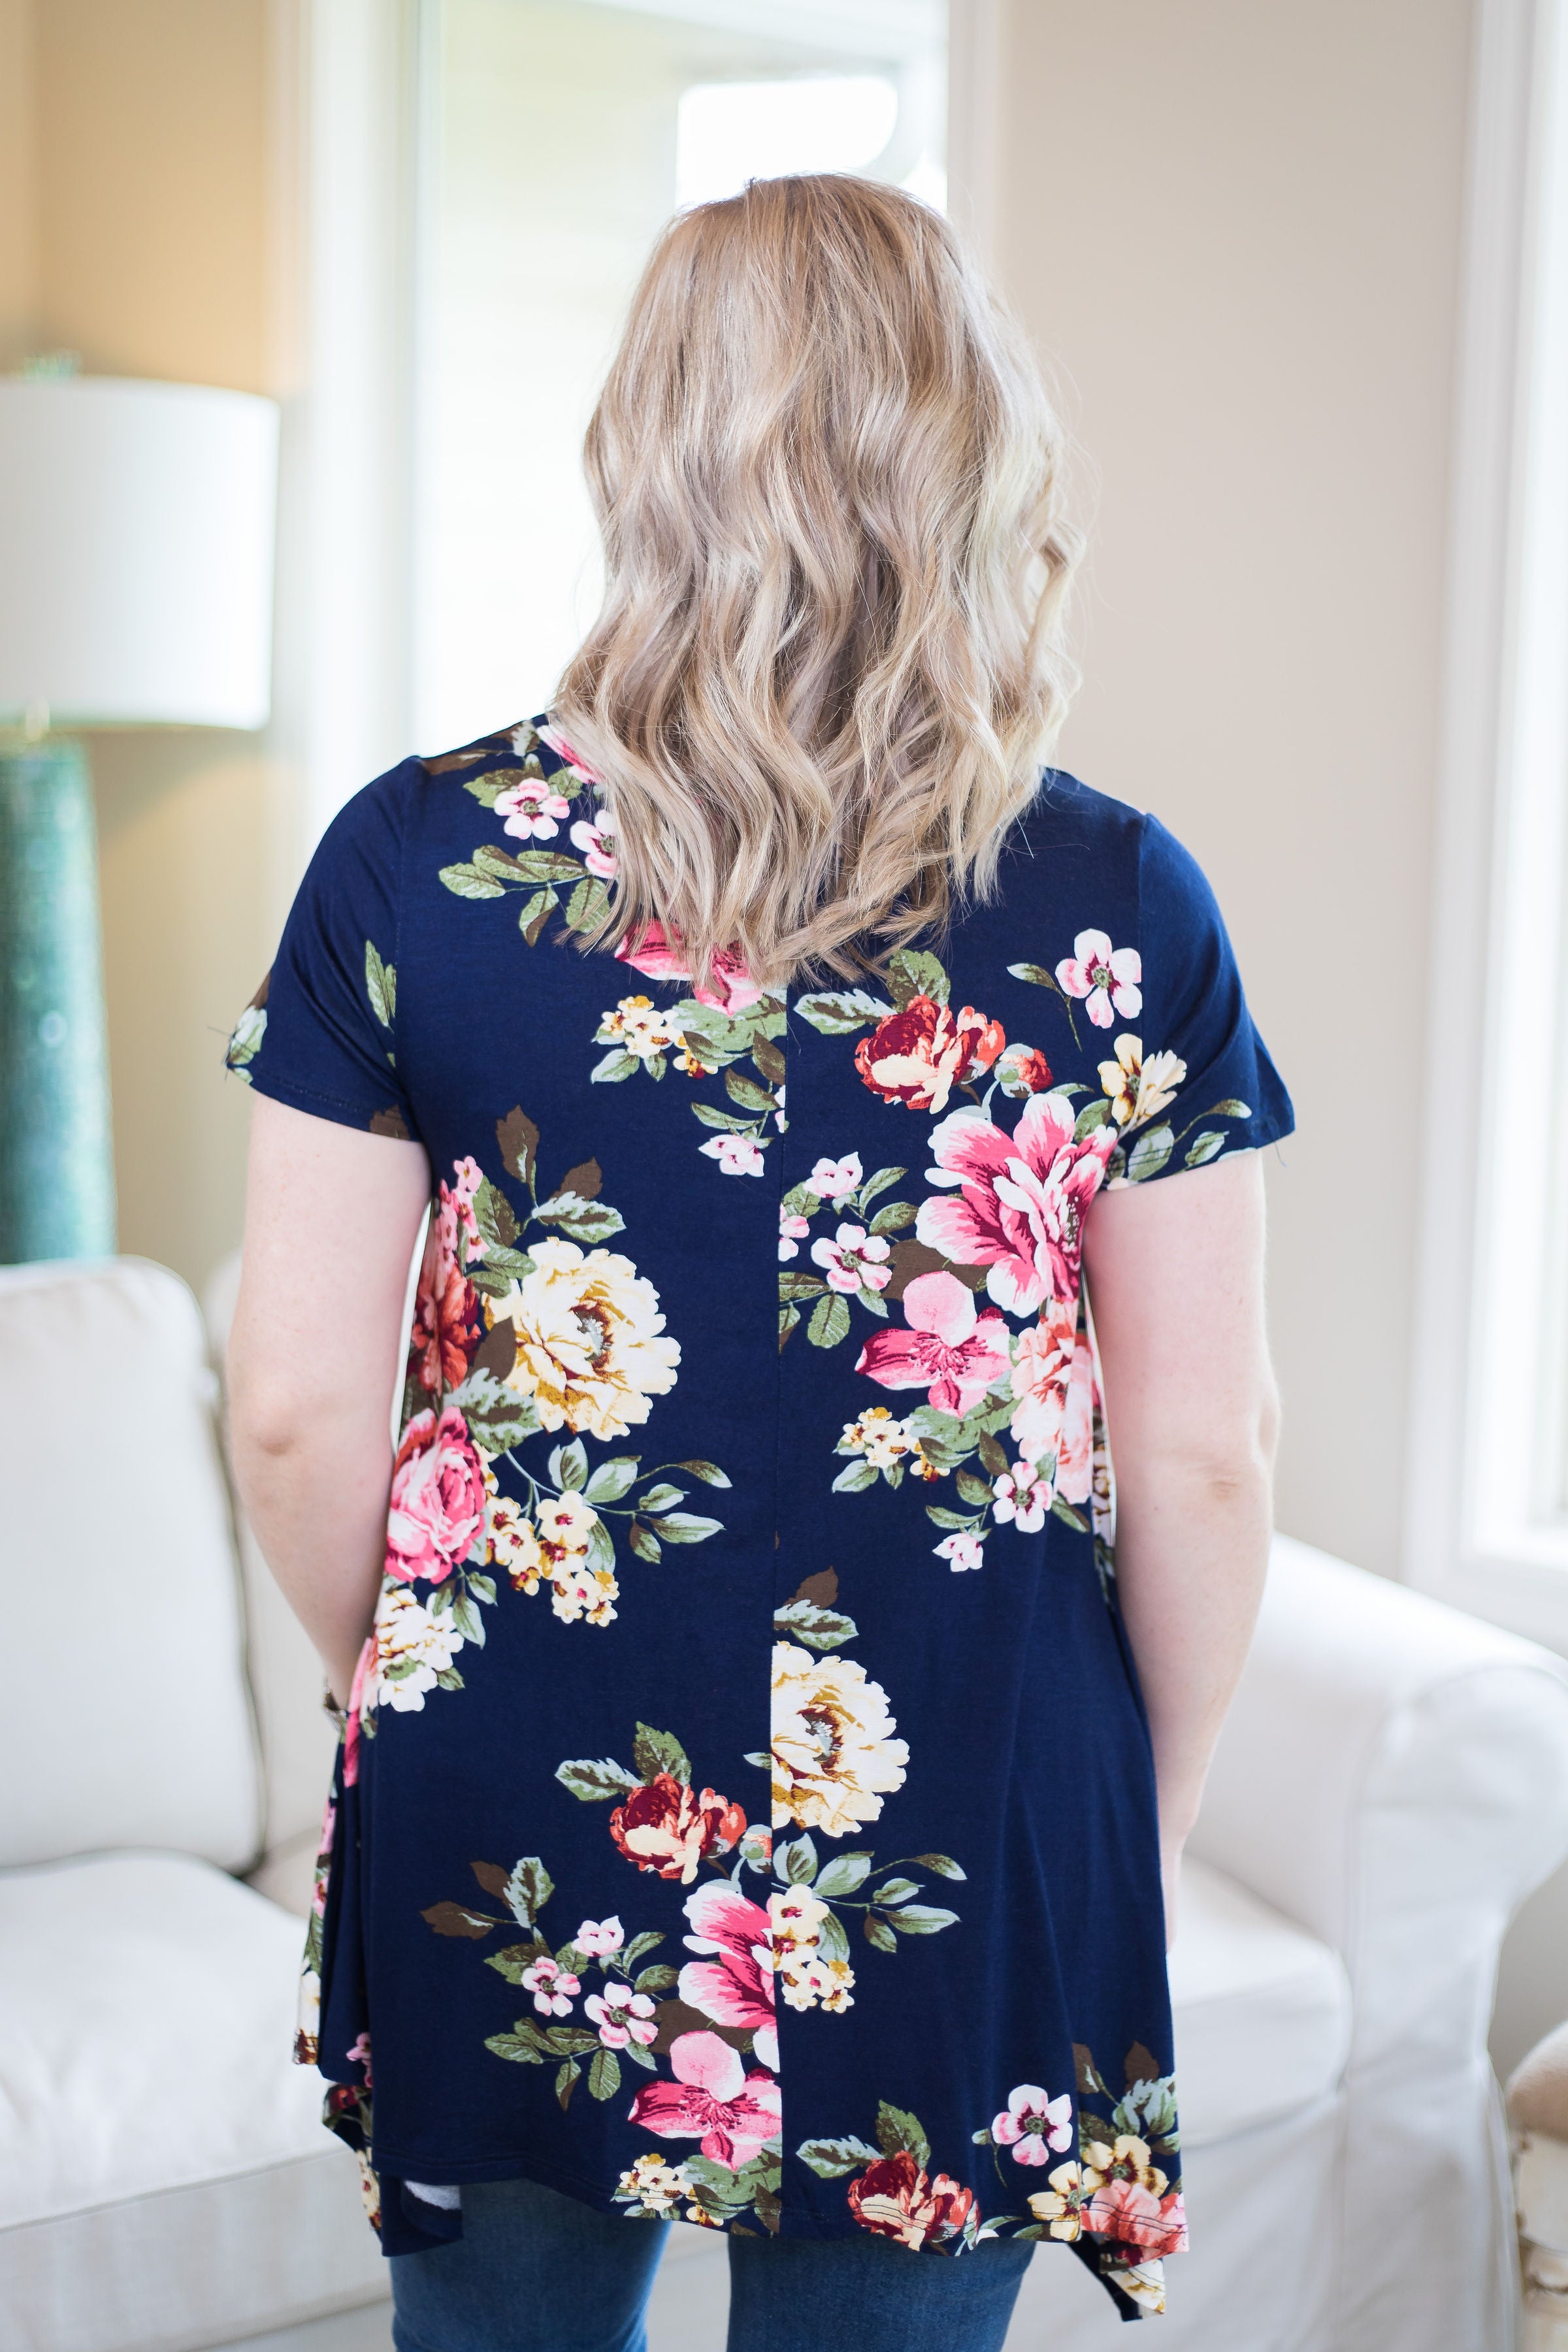 Last Chance Size Small | Keep You Around Short Sleeve Floral Trapeze Top in Navy Blue - Giddy Up Glamour Boutique